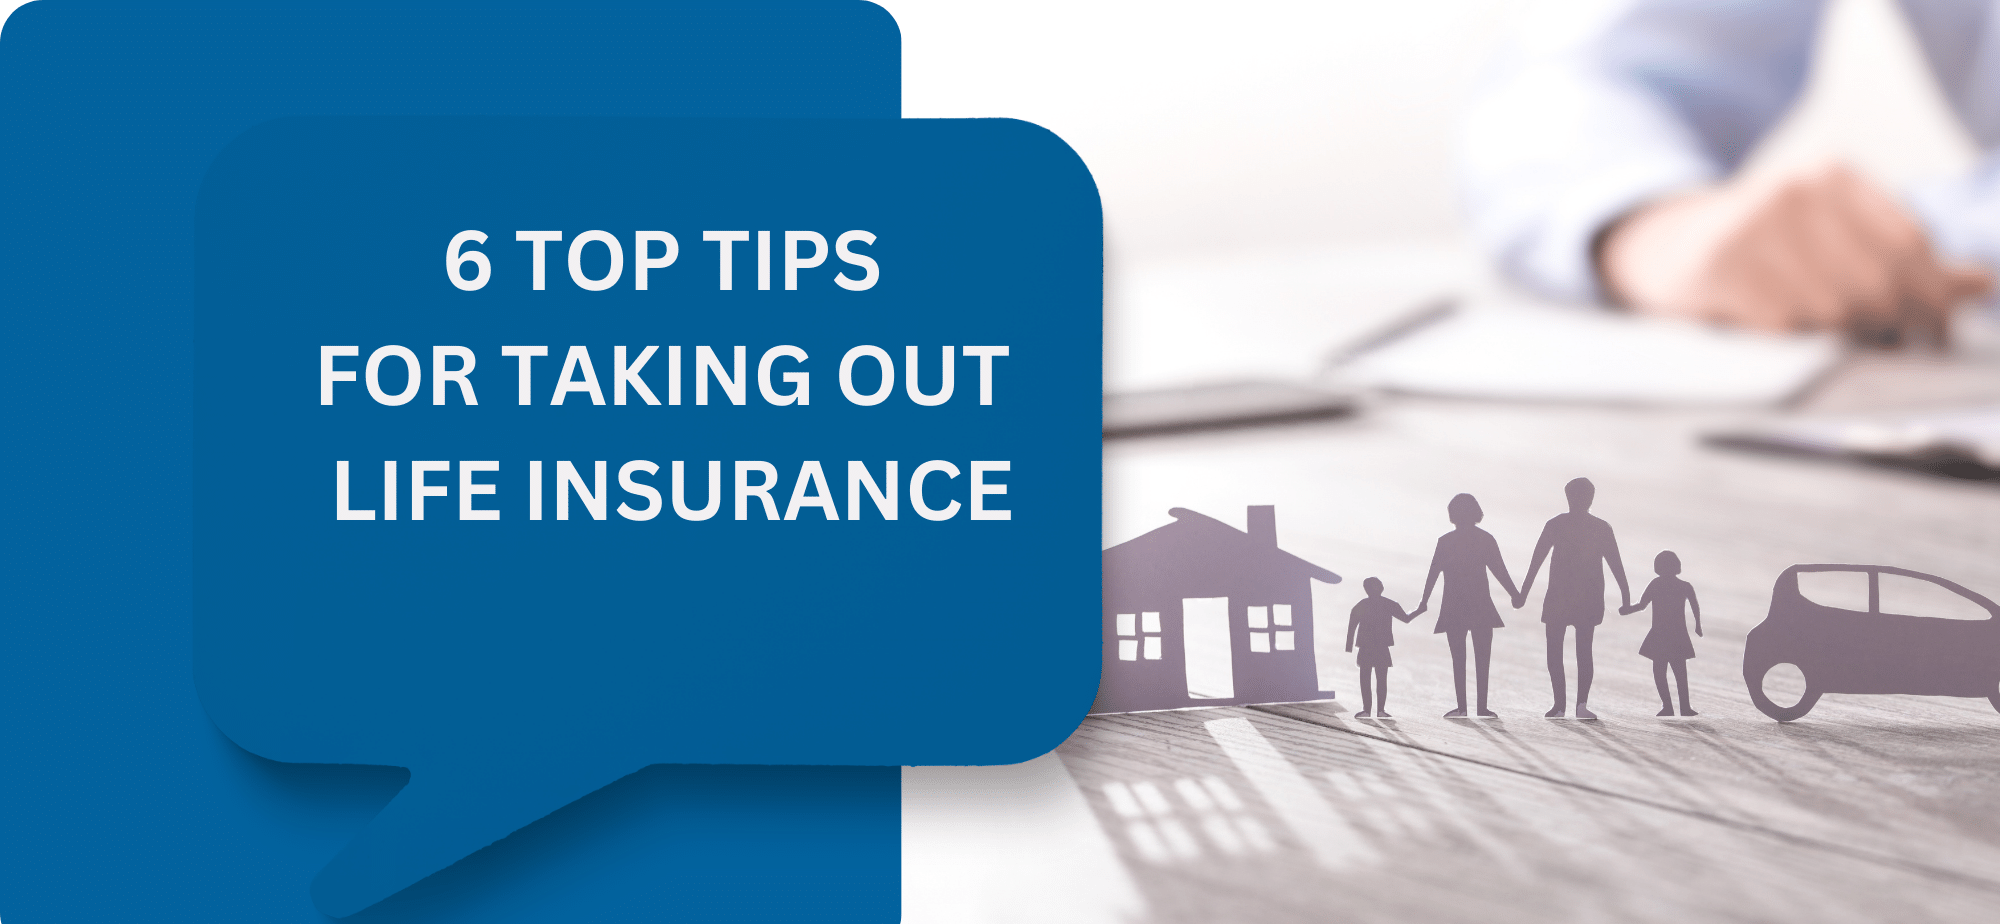 6 top tips for taking out life insurance